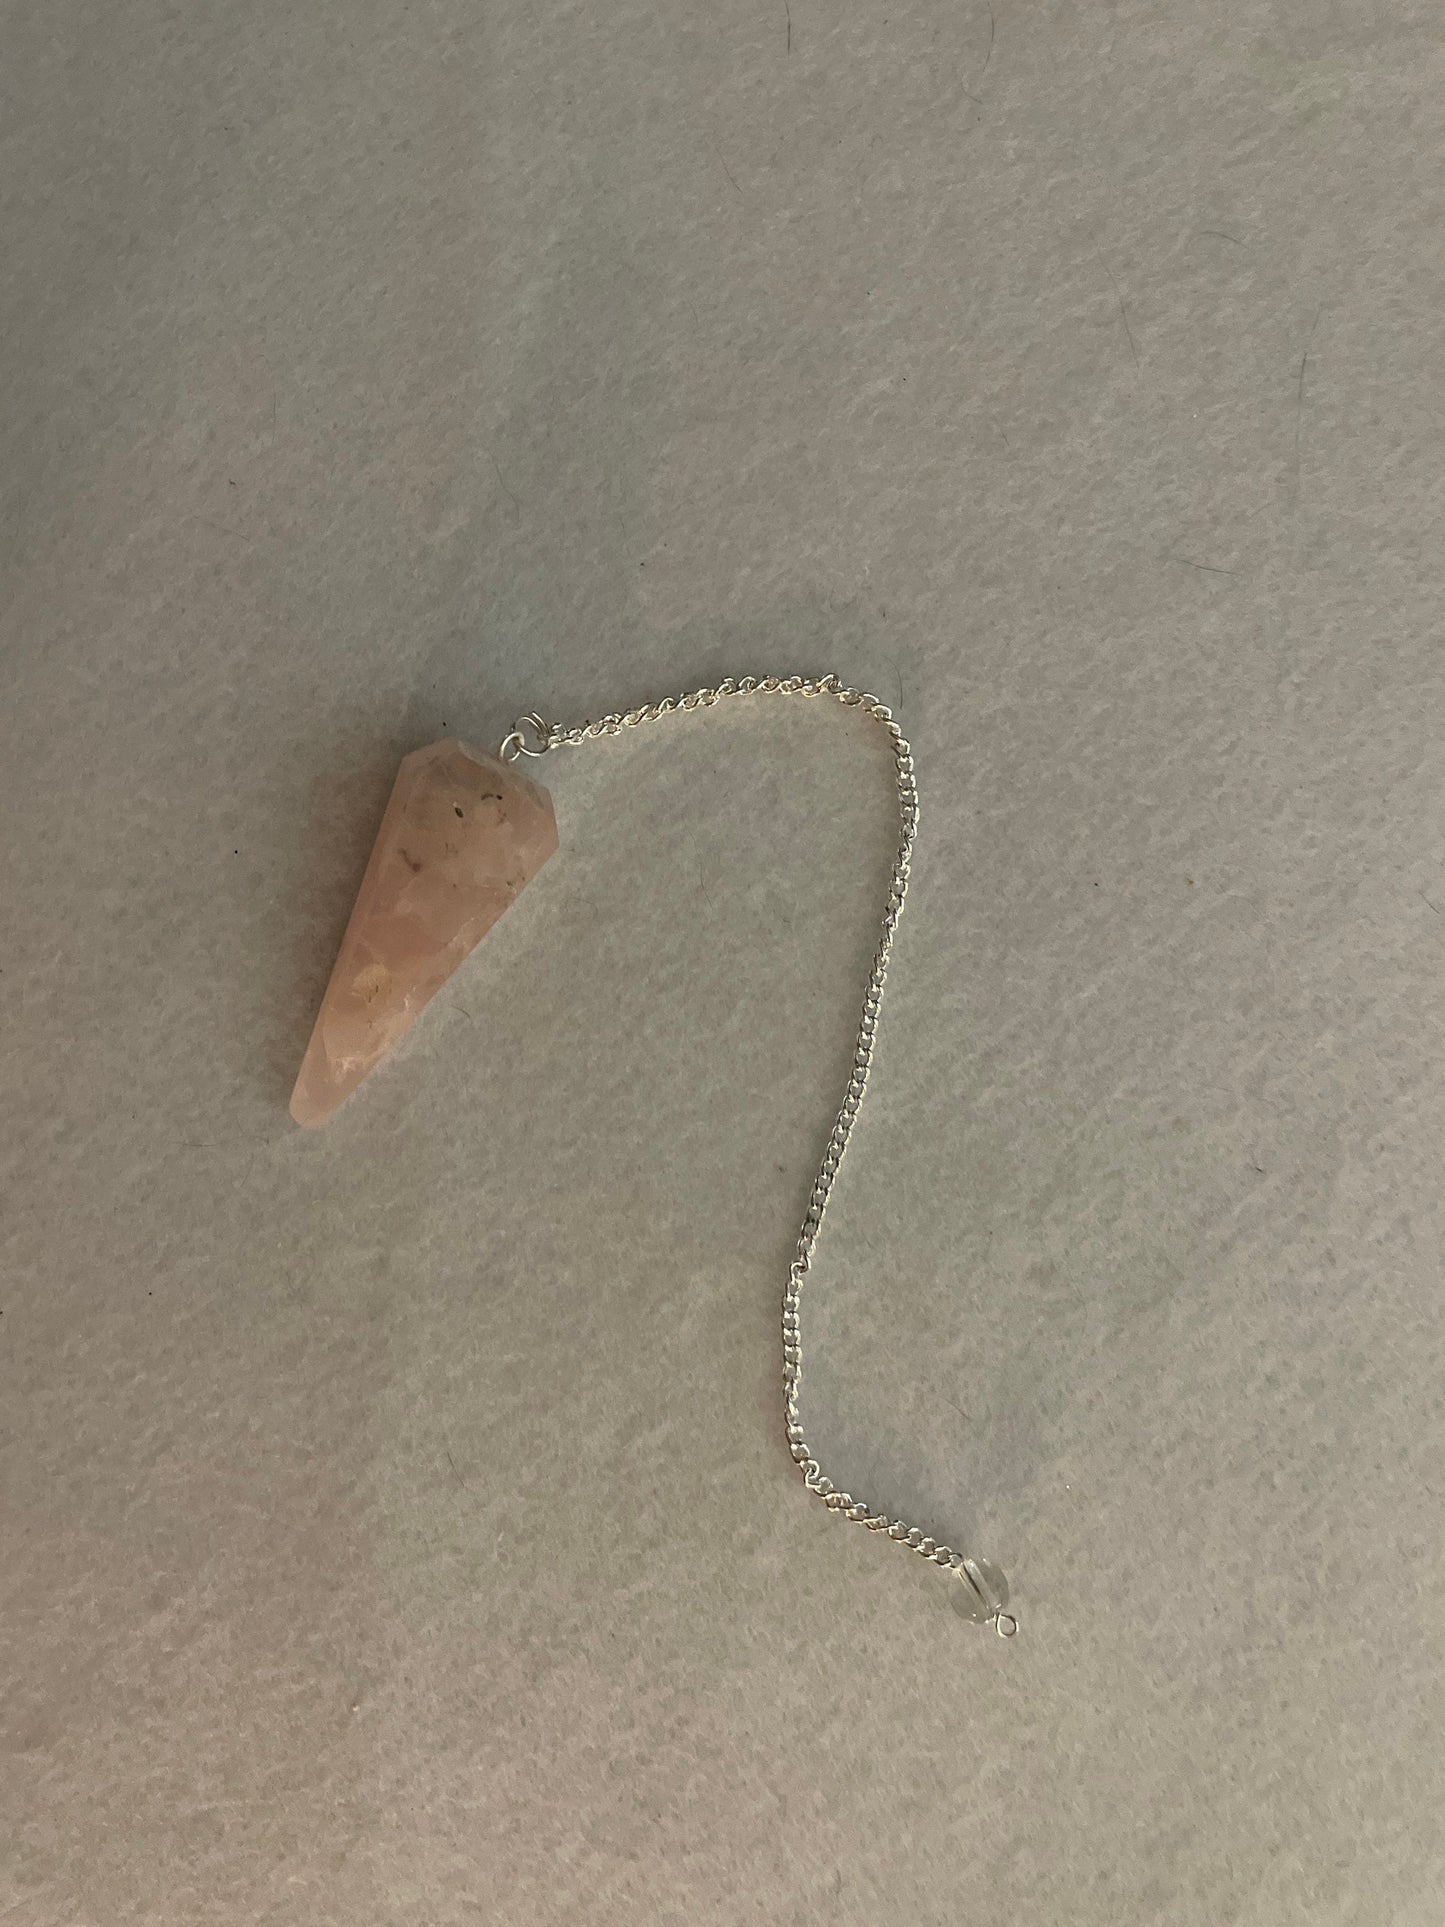 This beautiful Rose Quartz Pendulum is  1.75” and with chain is 8”.